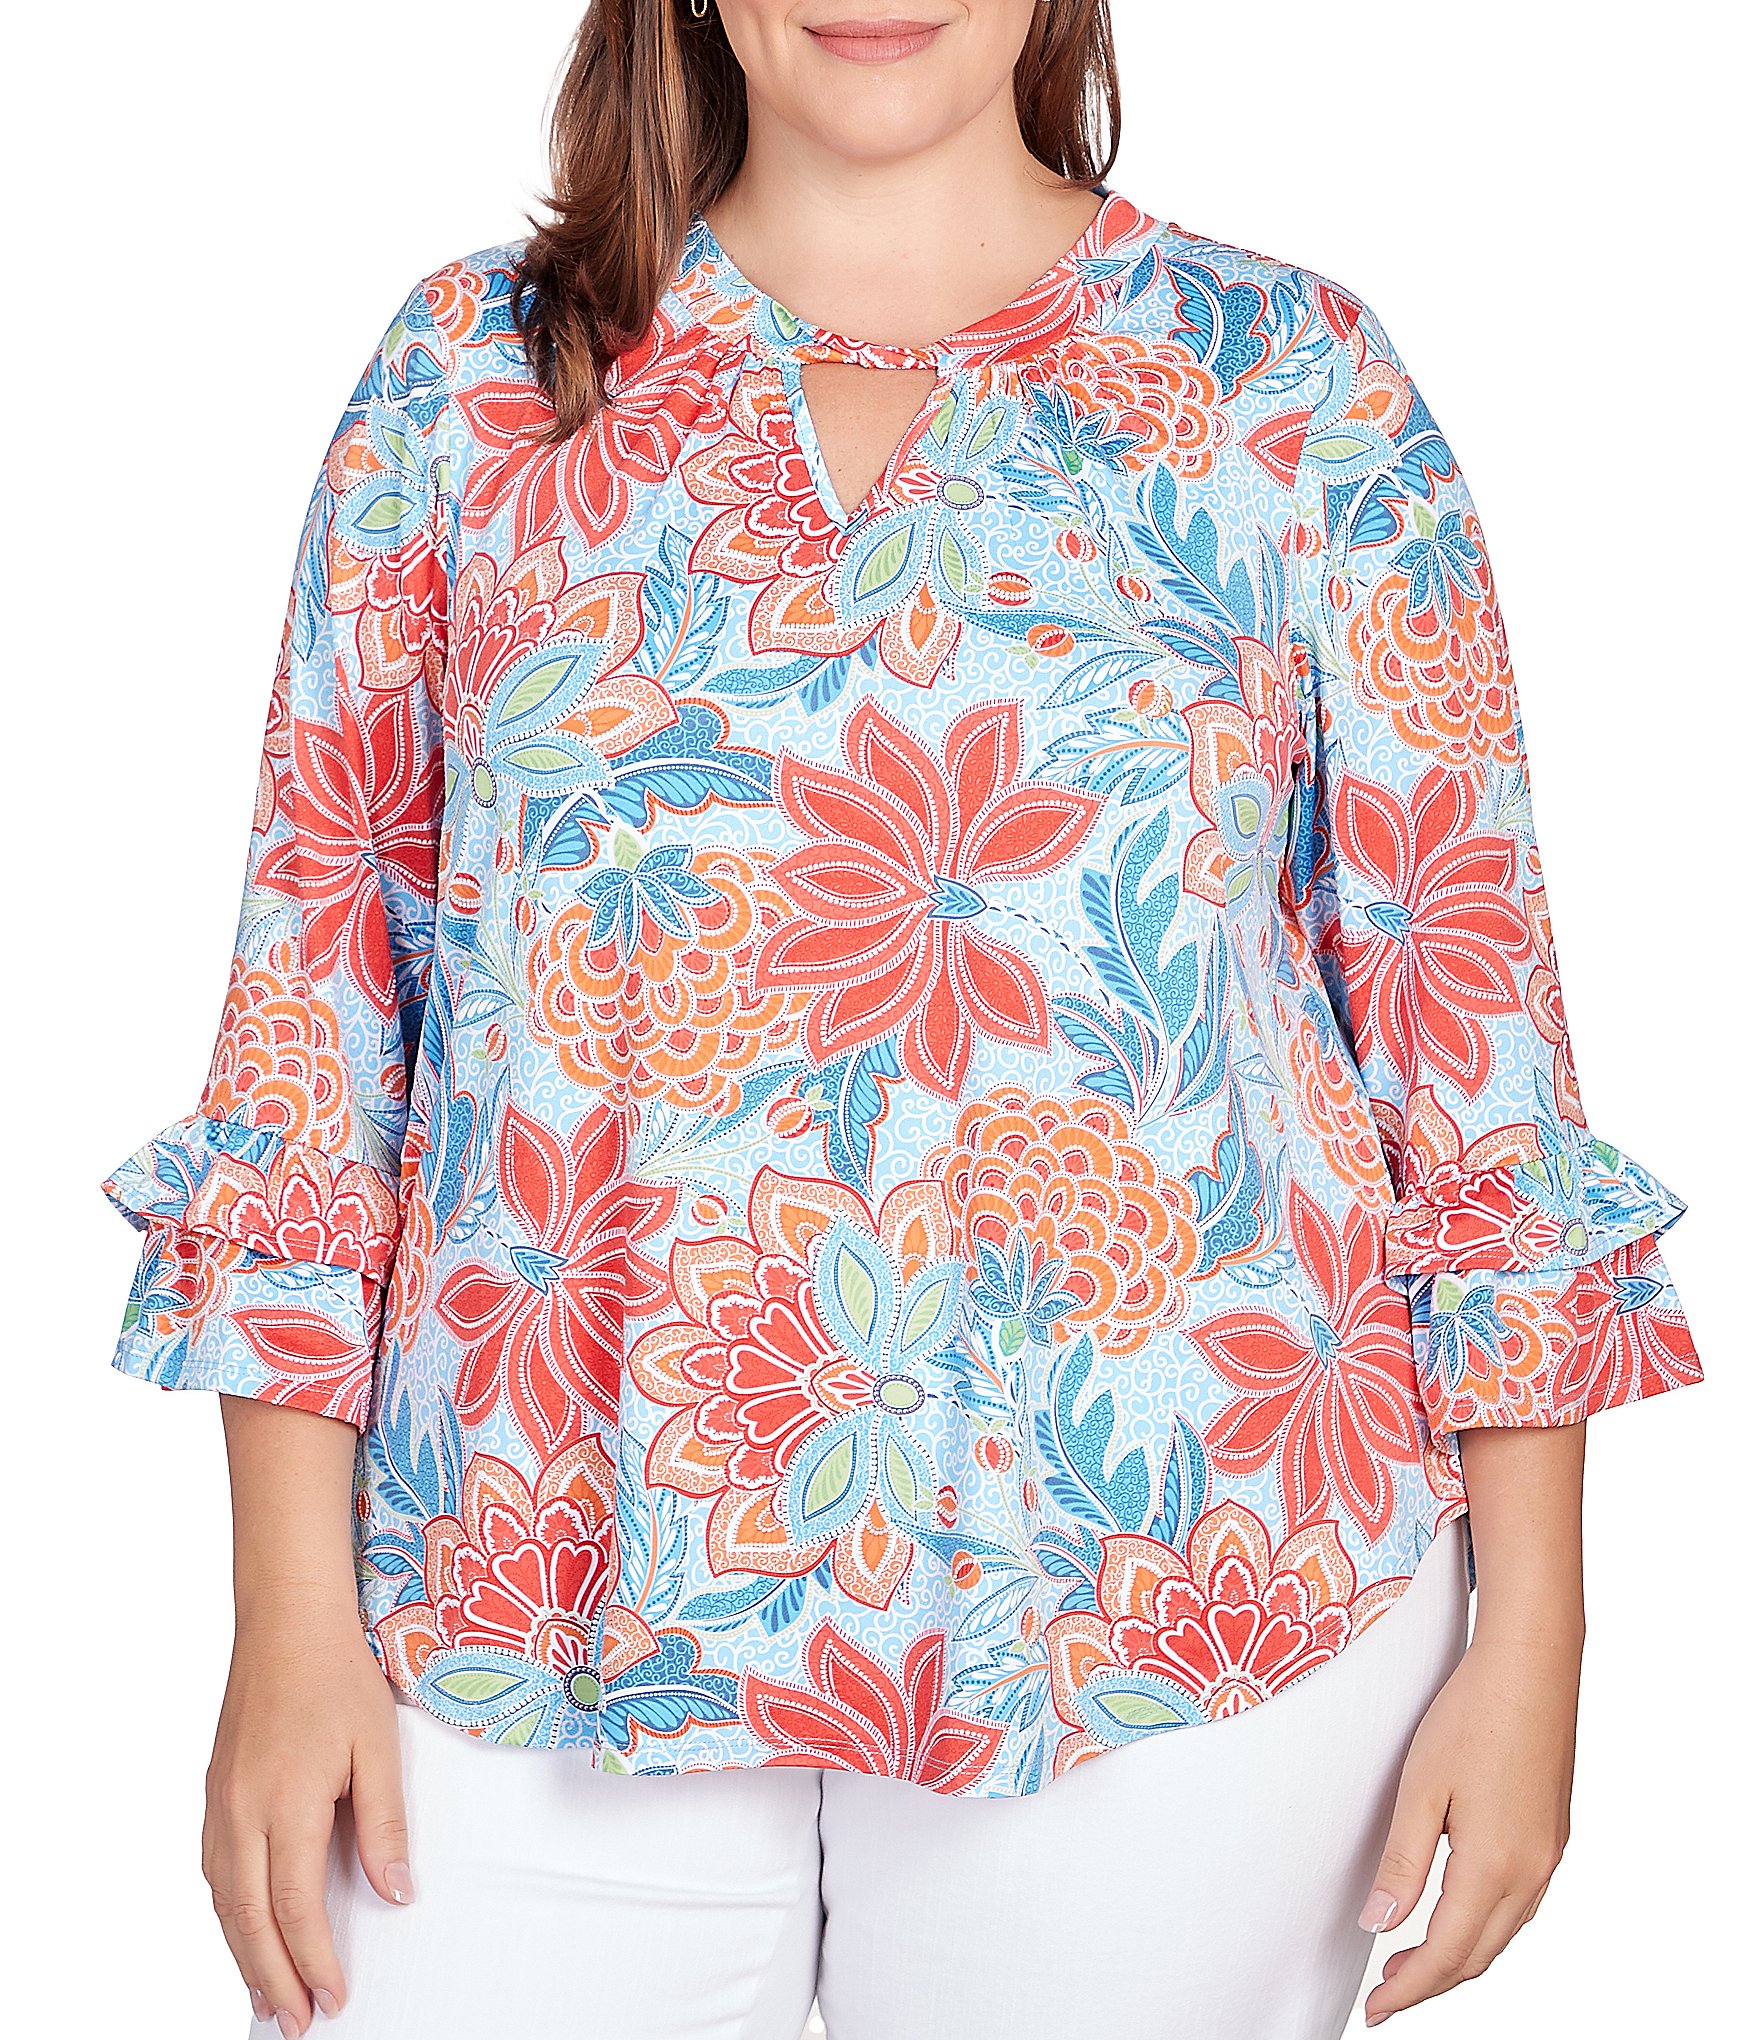 ruby rd tops: Women's Plus Size Clothing